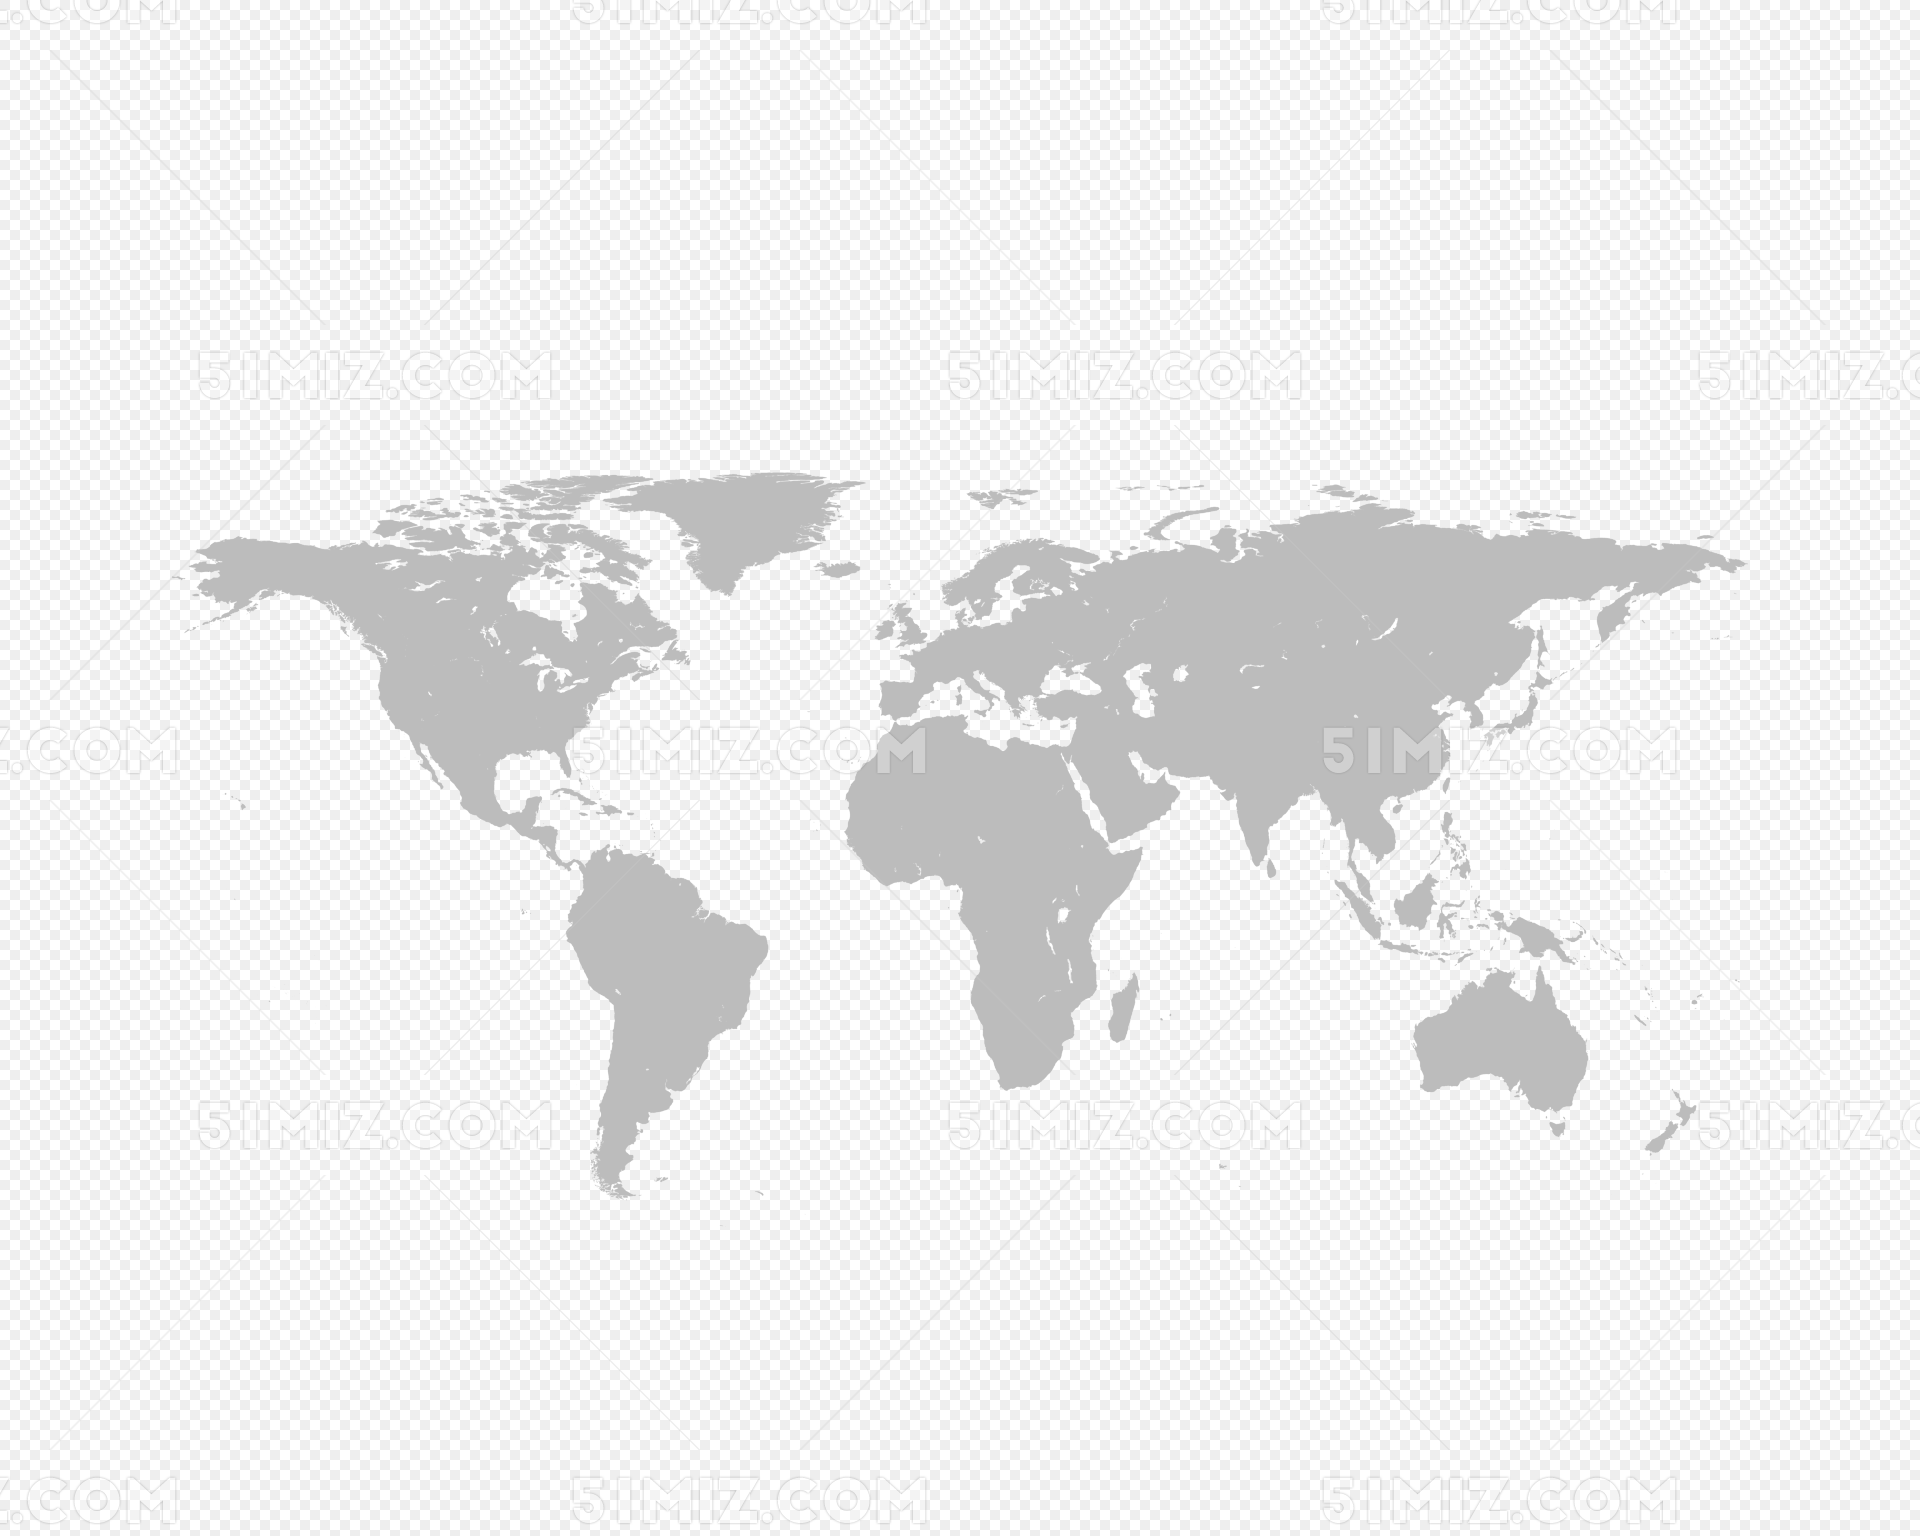 Premium Vector | World map outline isolated on white background